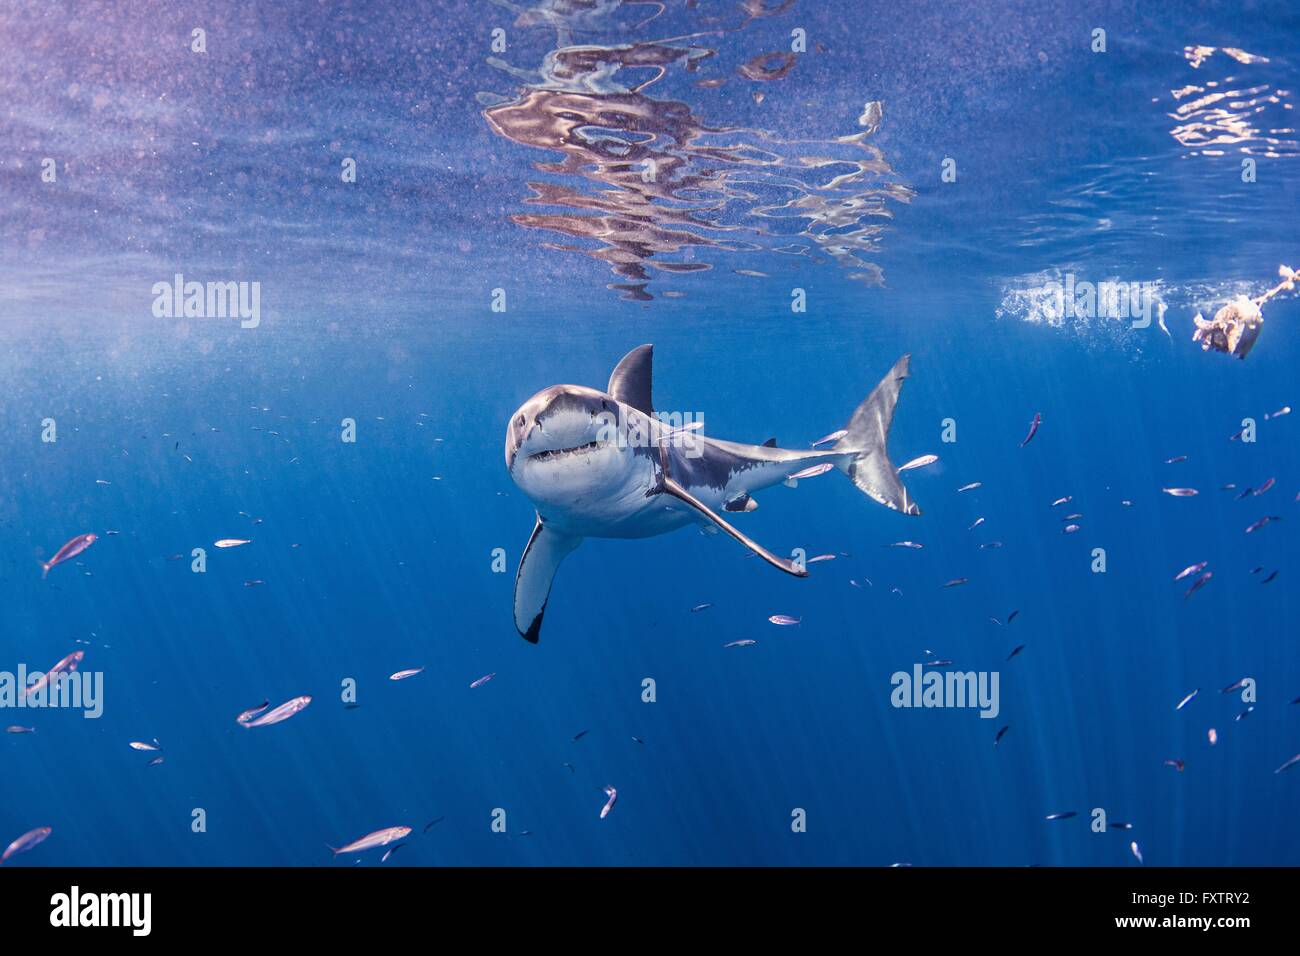 Underwater front view of great white shark looking at camera Stock Photo